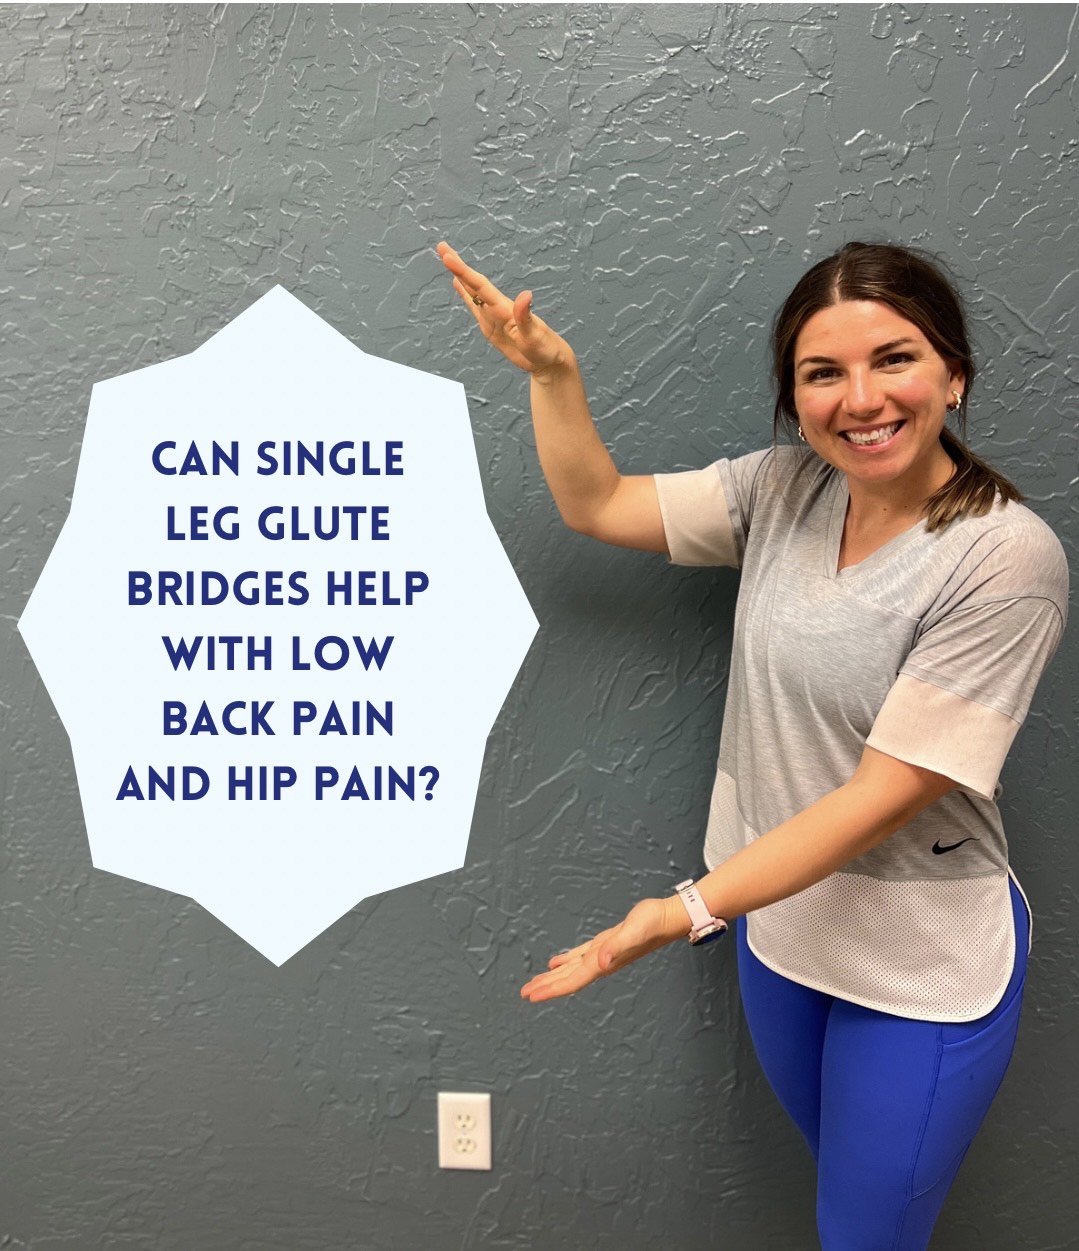 Can single leg bridges help with back pain or knee pain? by Dr. Hailey Jackson